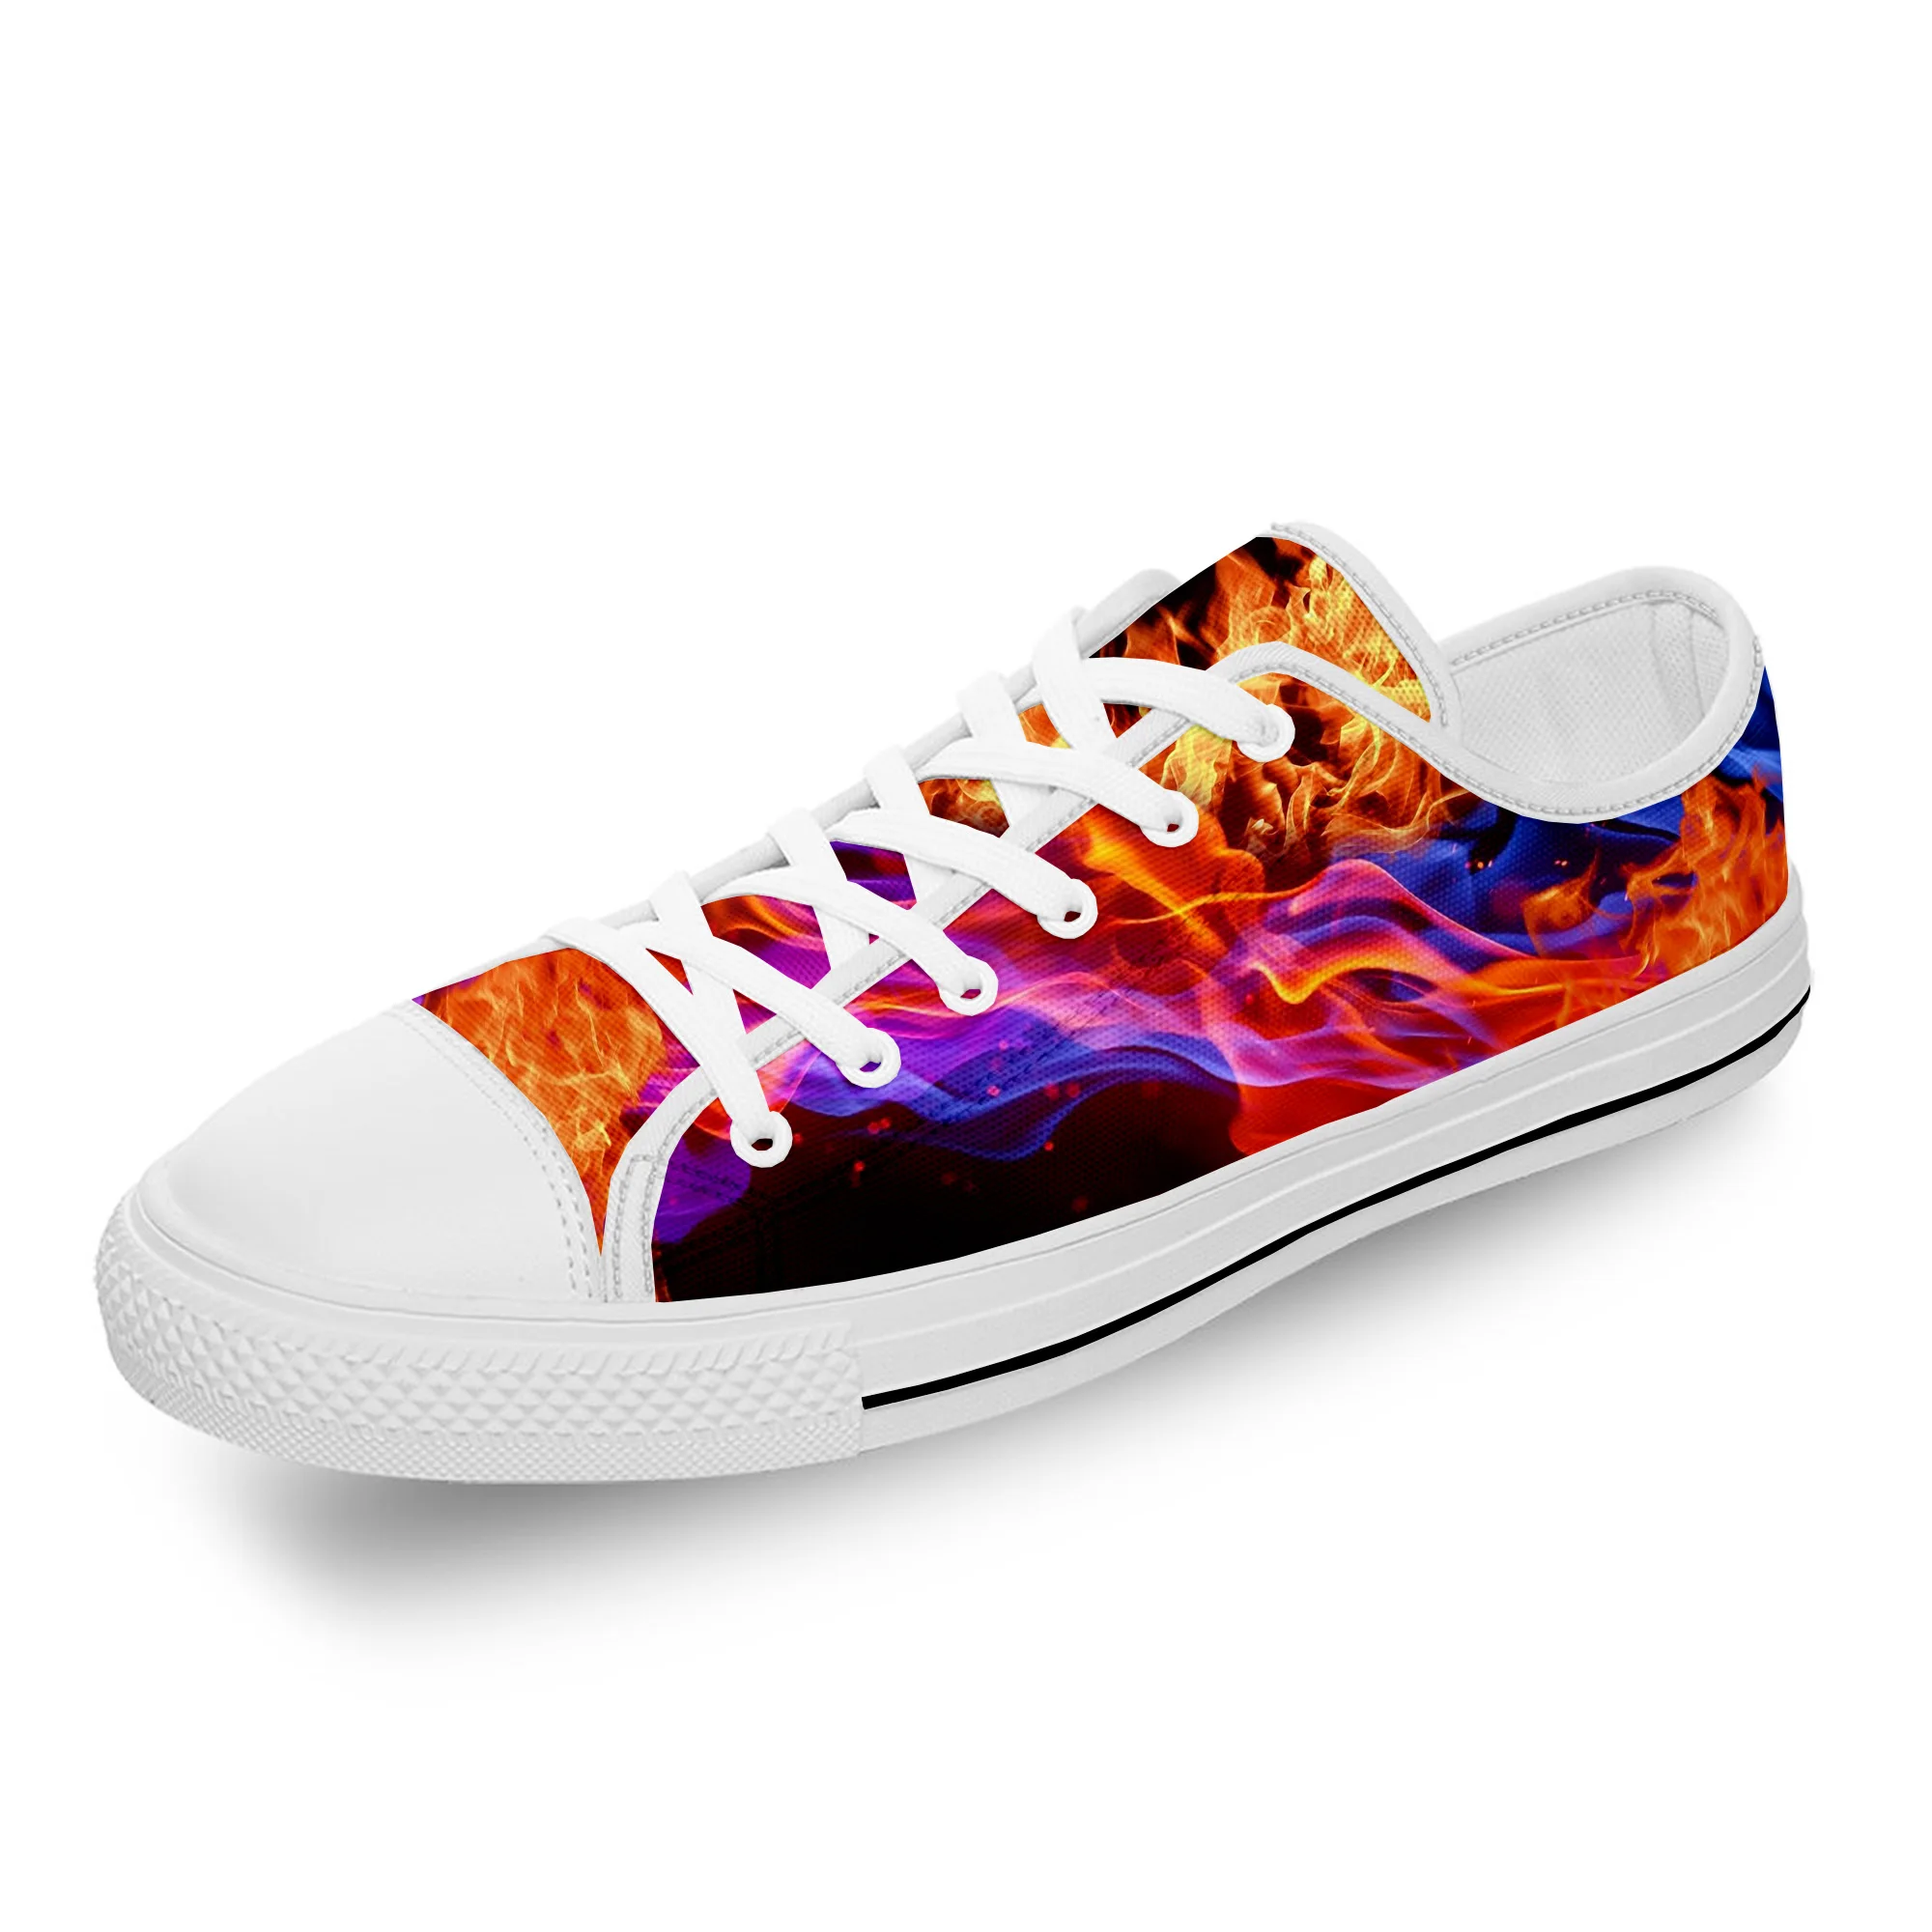 Anime Cartoon Flaming Flame Fire White Cloth Fashion 3D Print Low Top Canvas Shoes Men Women Lightweight Breathable Sneakers